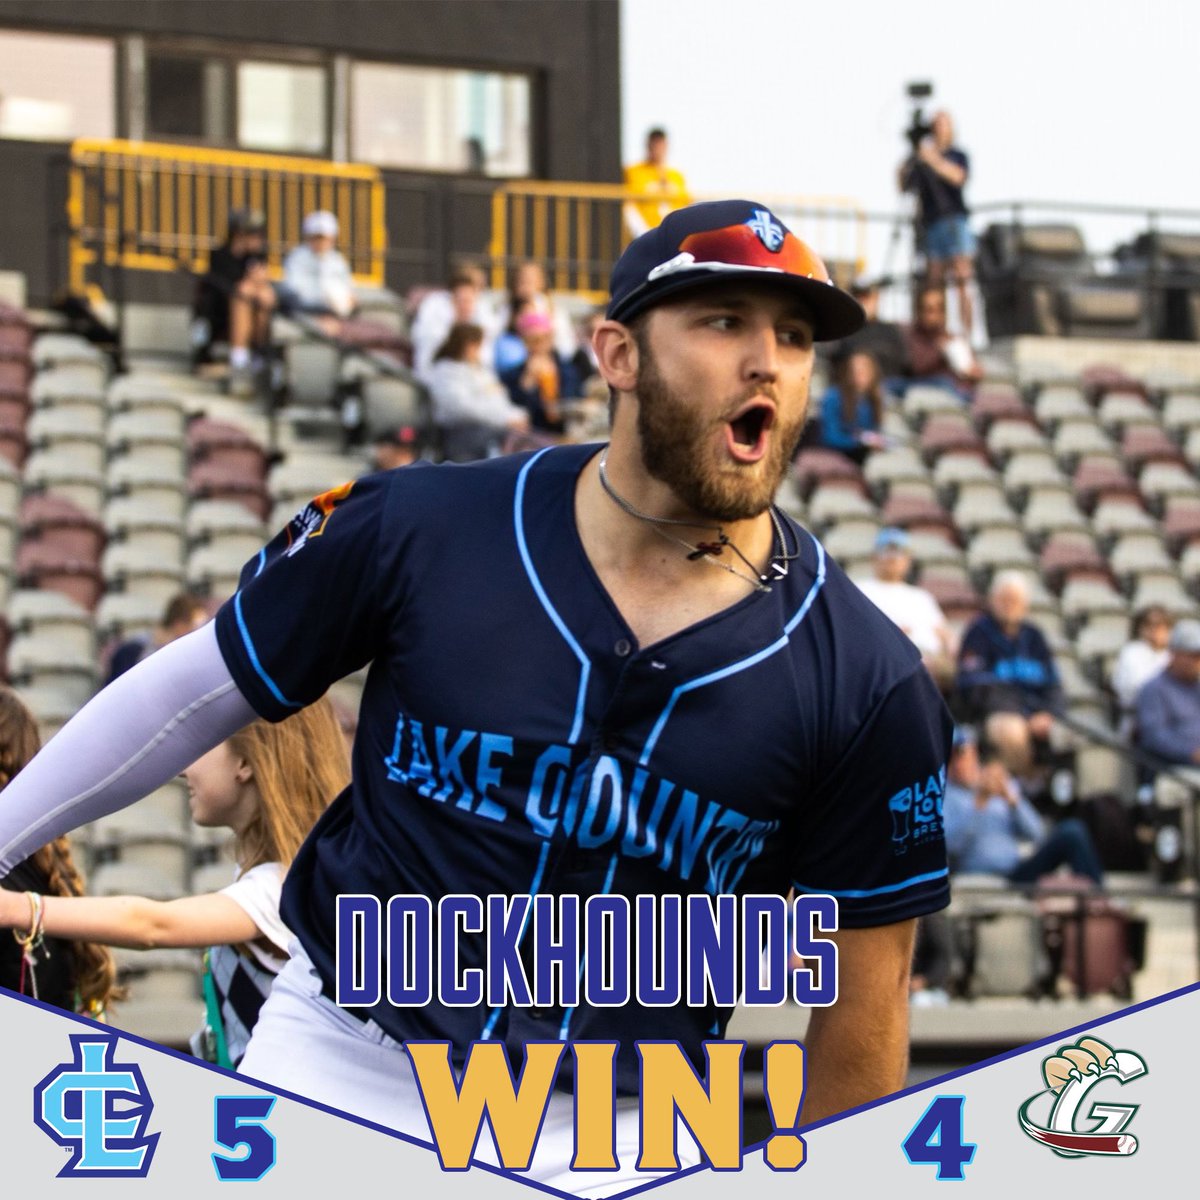 What a grab by Blake Tiberi to close out the RailCats! 5-4 🐶

DockHounds look to bust out the brooms at Gary SouthShore tomorrow. 

#HowlYeah